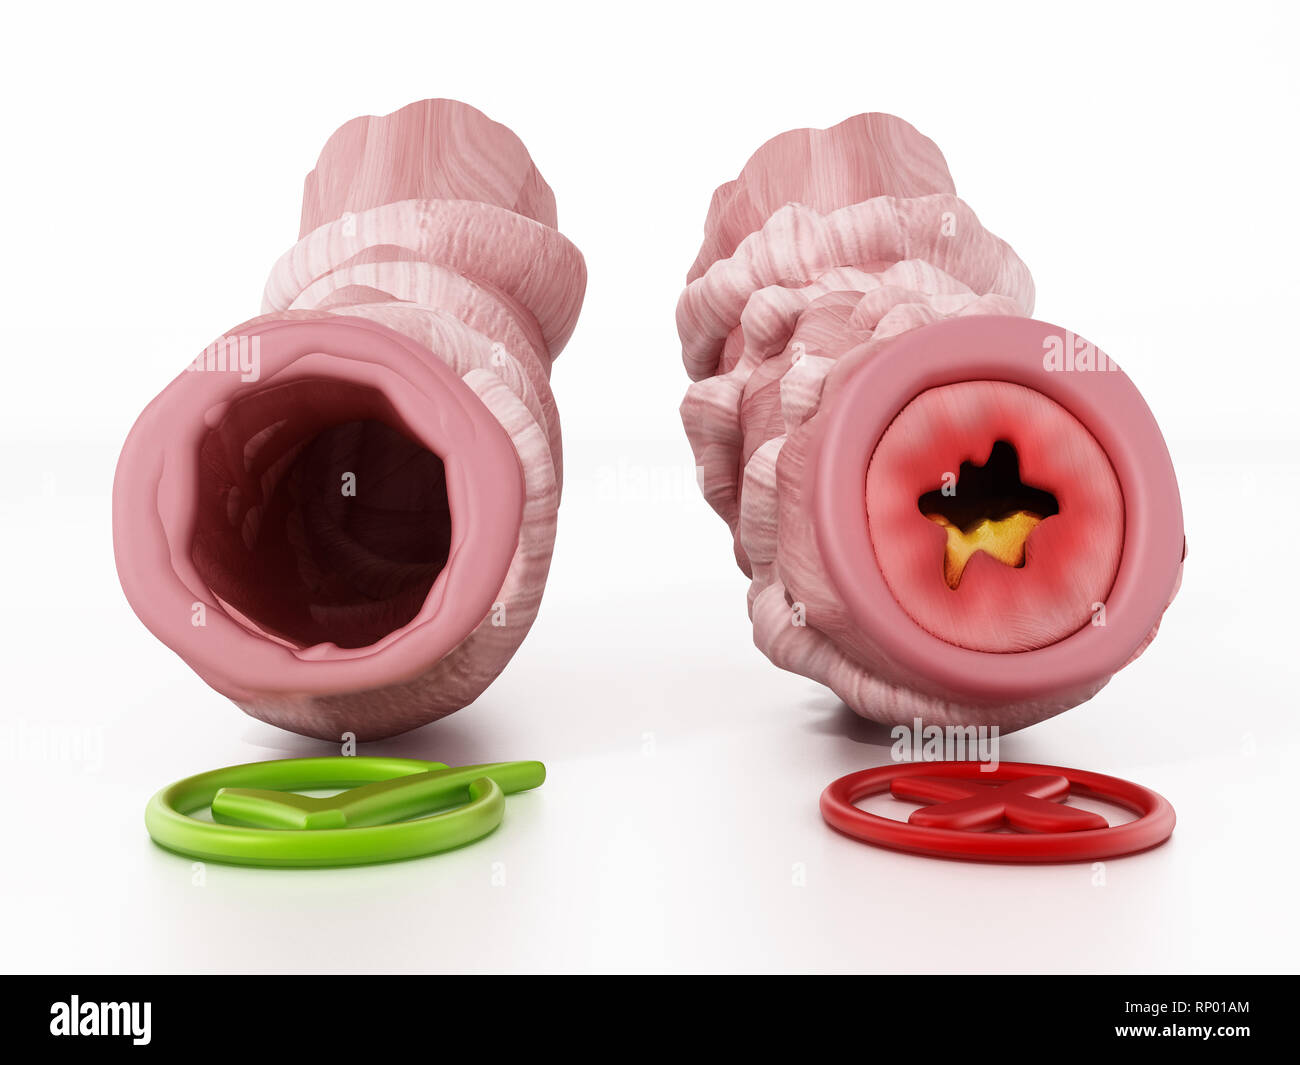 Obstructed and unobstructed bronchial tubes representing asthma. 3D illustration. Stock Photo